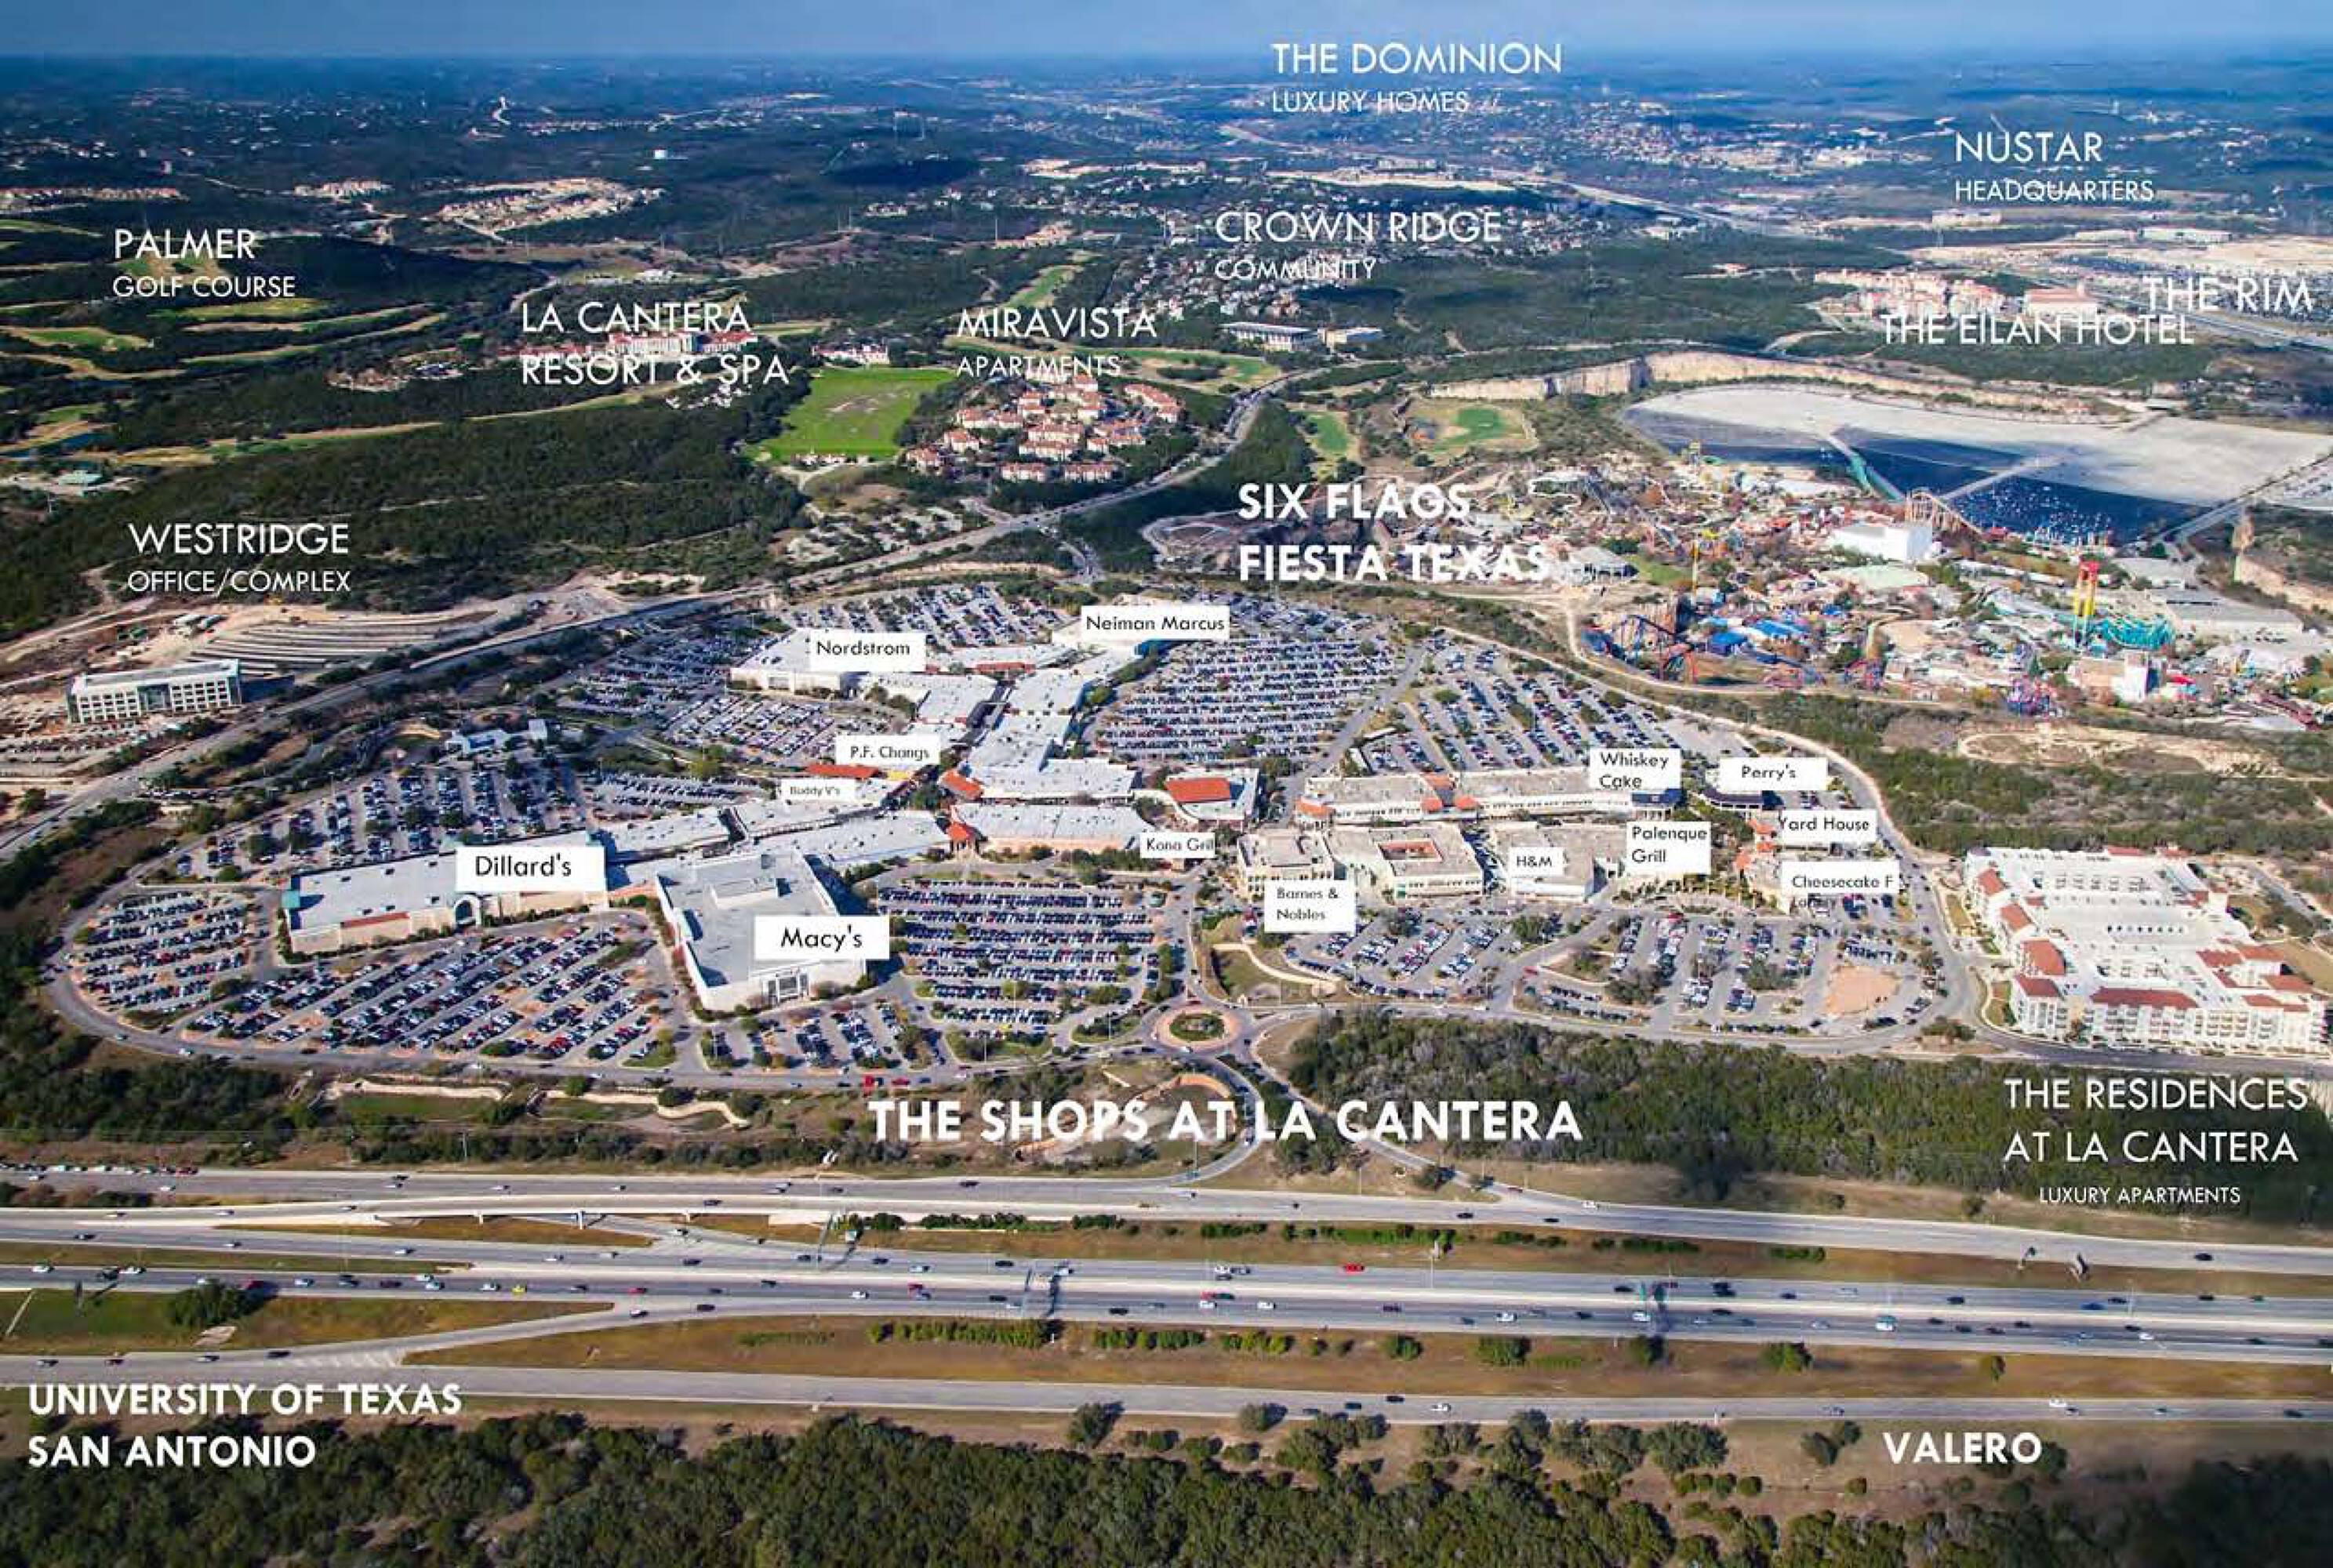 The Shops at La Cantera is getting 13 new stores in 2023